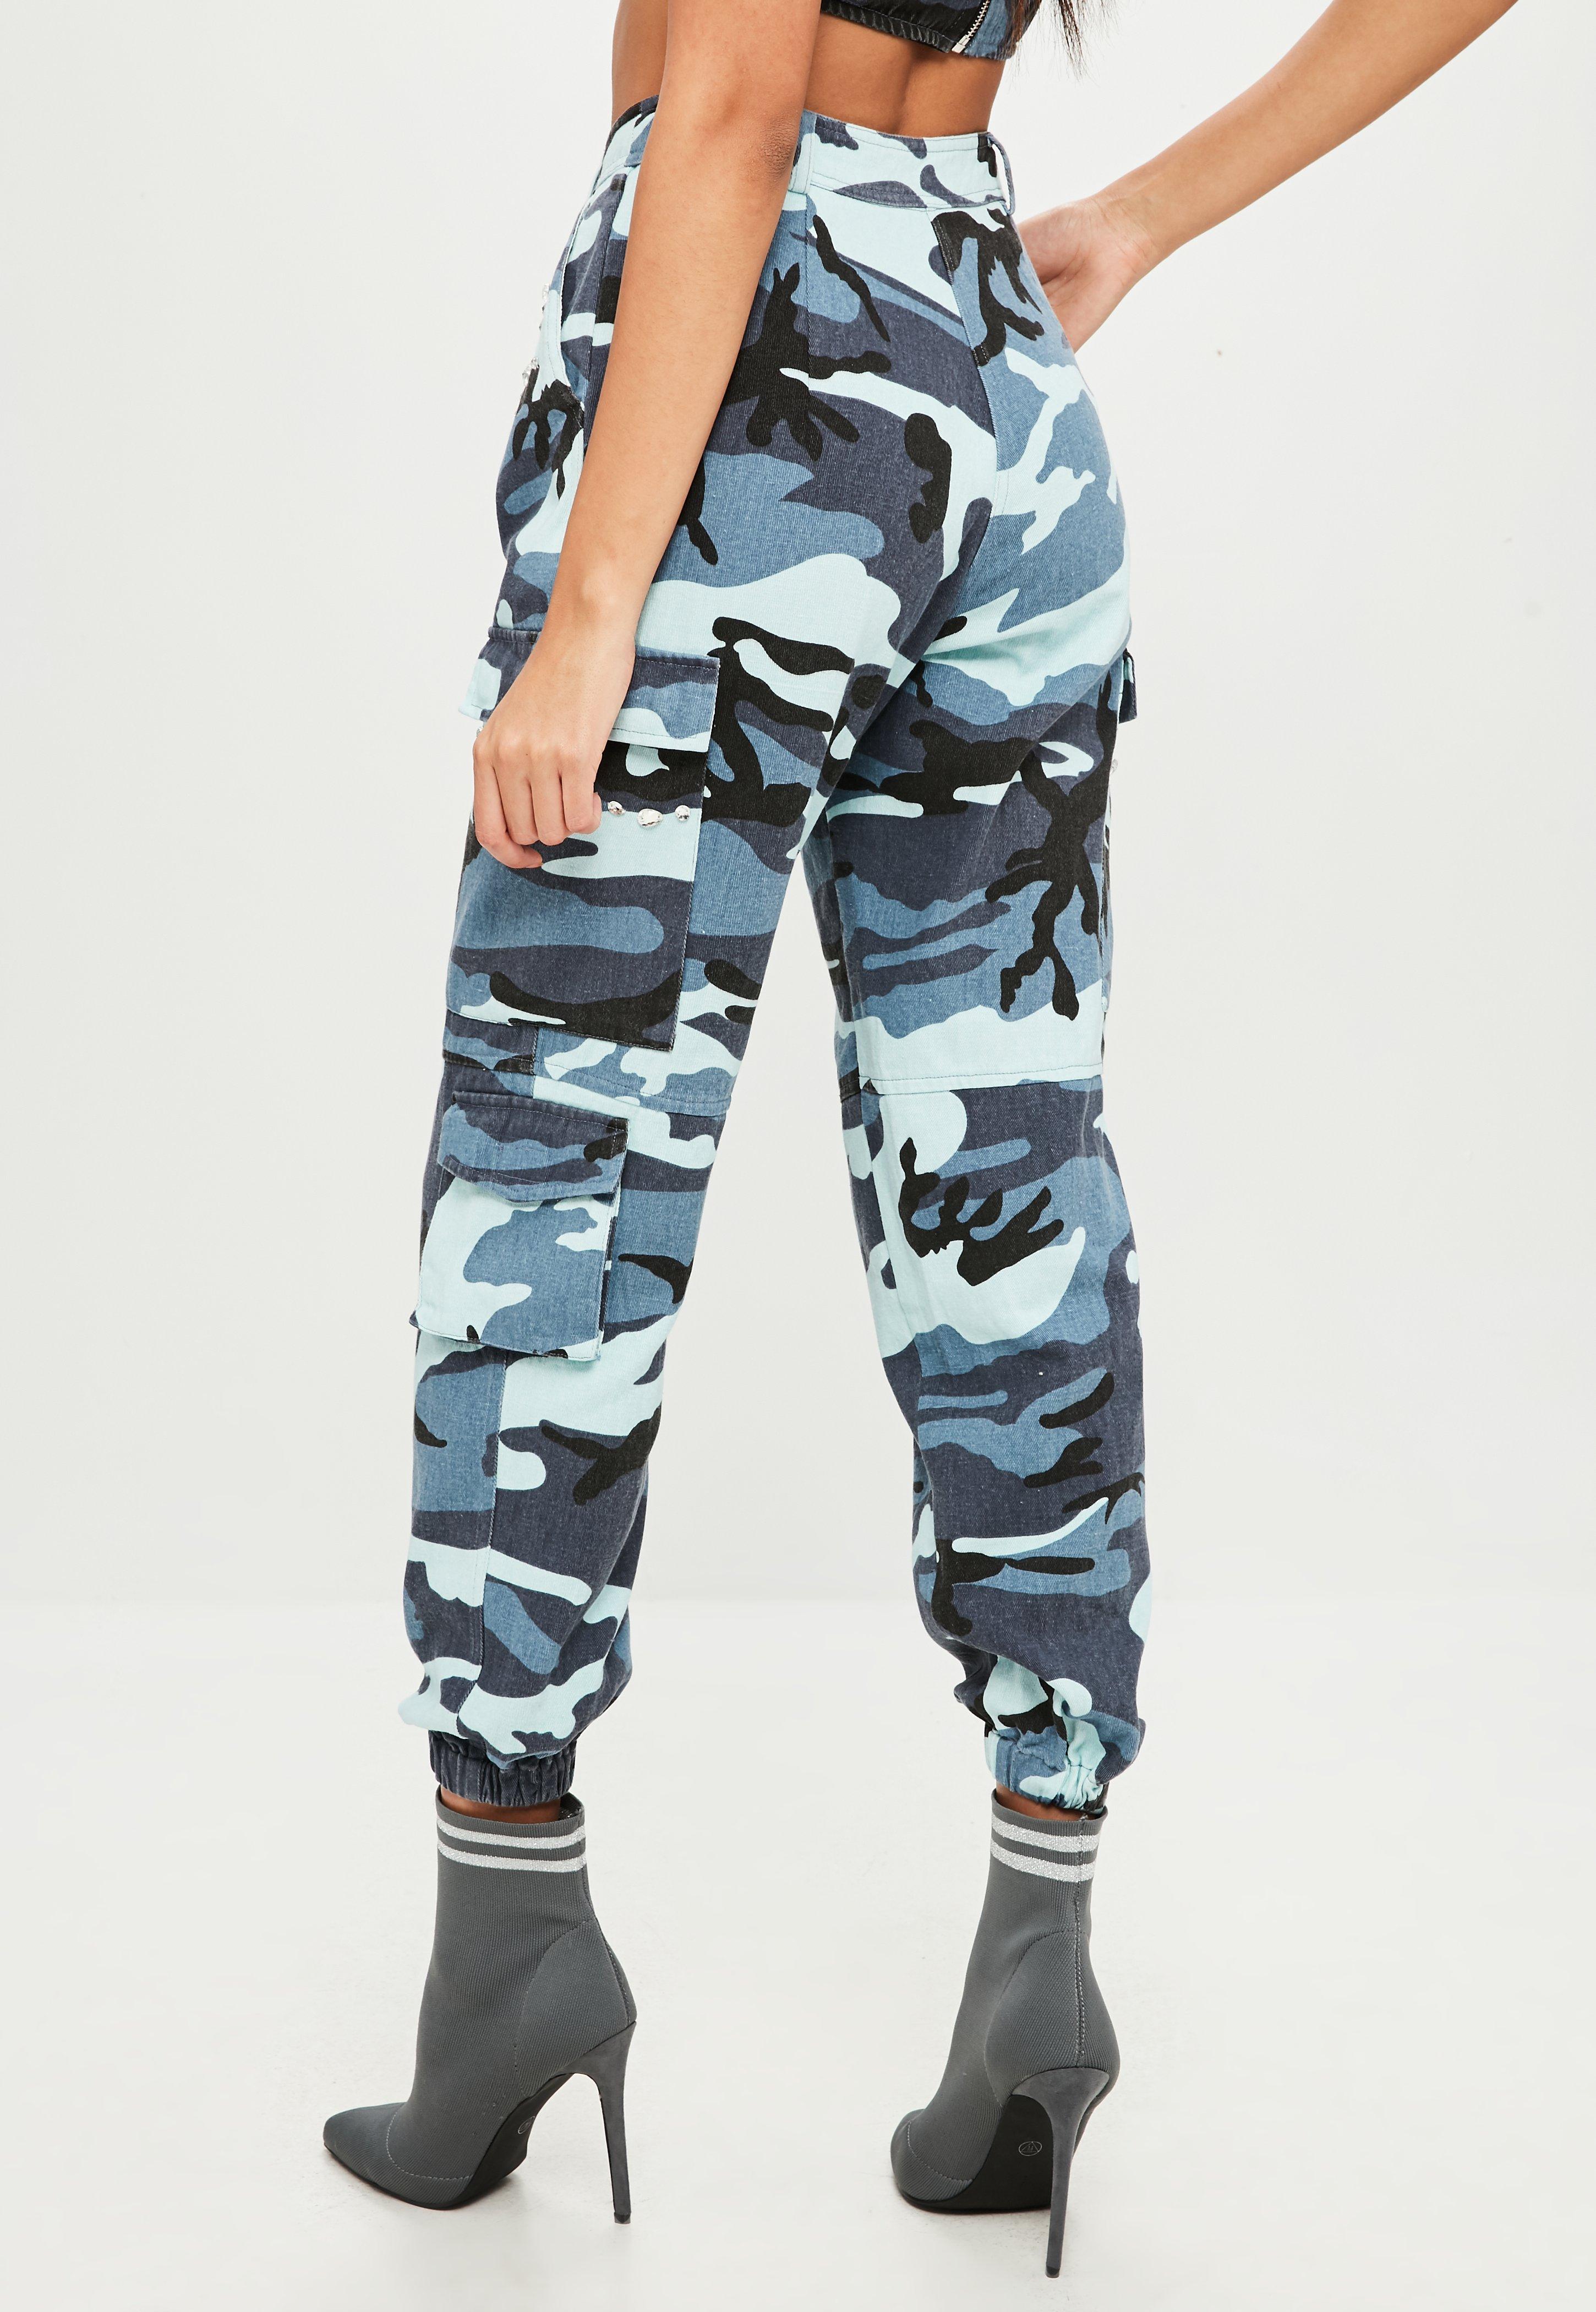 Missguided Cotton Carli Bybel X Blue Camo Cargo Pants - Lyst